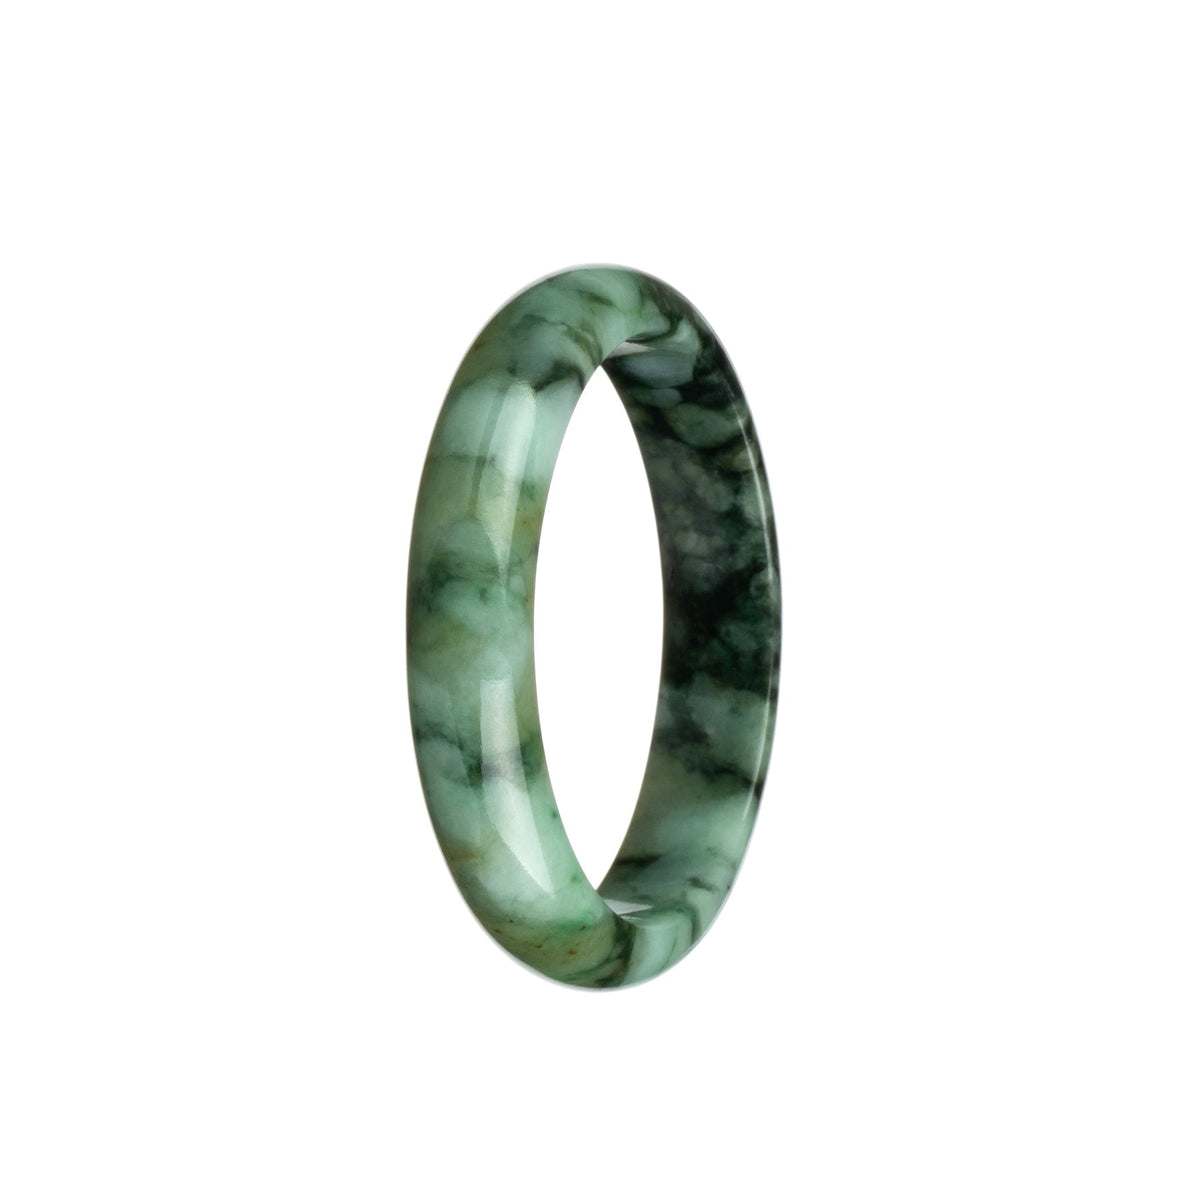 A beautiful green and black patterned traditional jade bangle, certified Grade A, in a 54mm half moon shape. Perfect for adding a touch of elegance to any outfit.